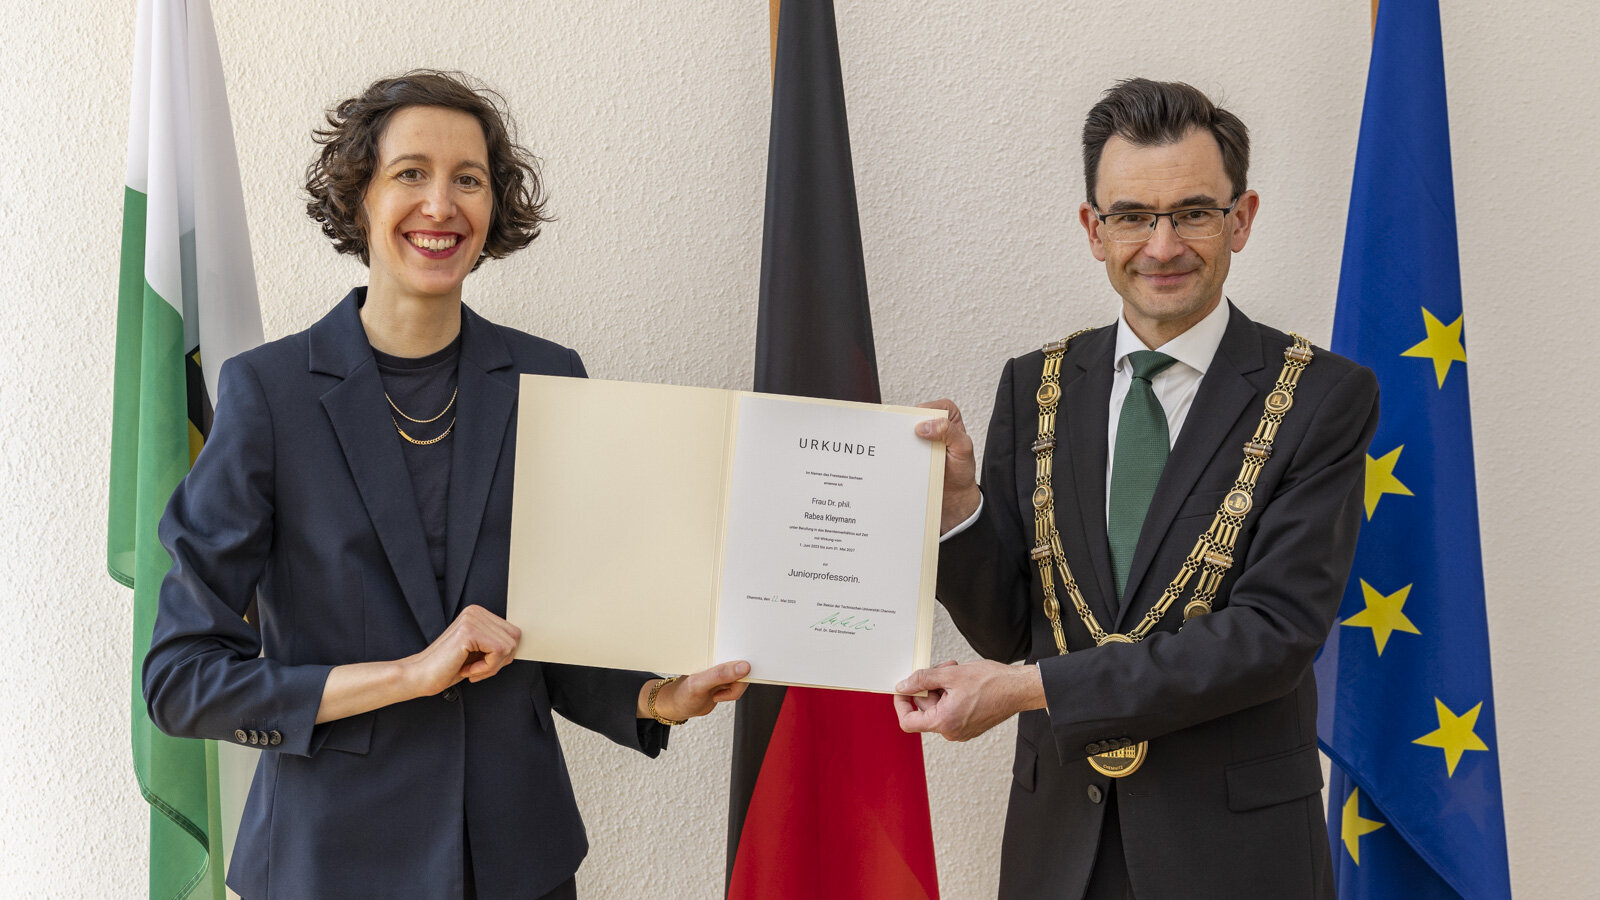 A woman in a dress and a man in a suit with a large chain are both holding a certificate.